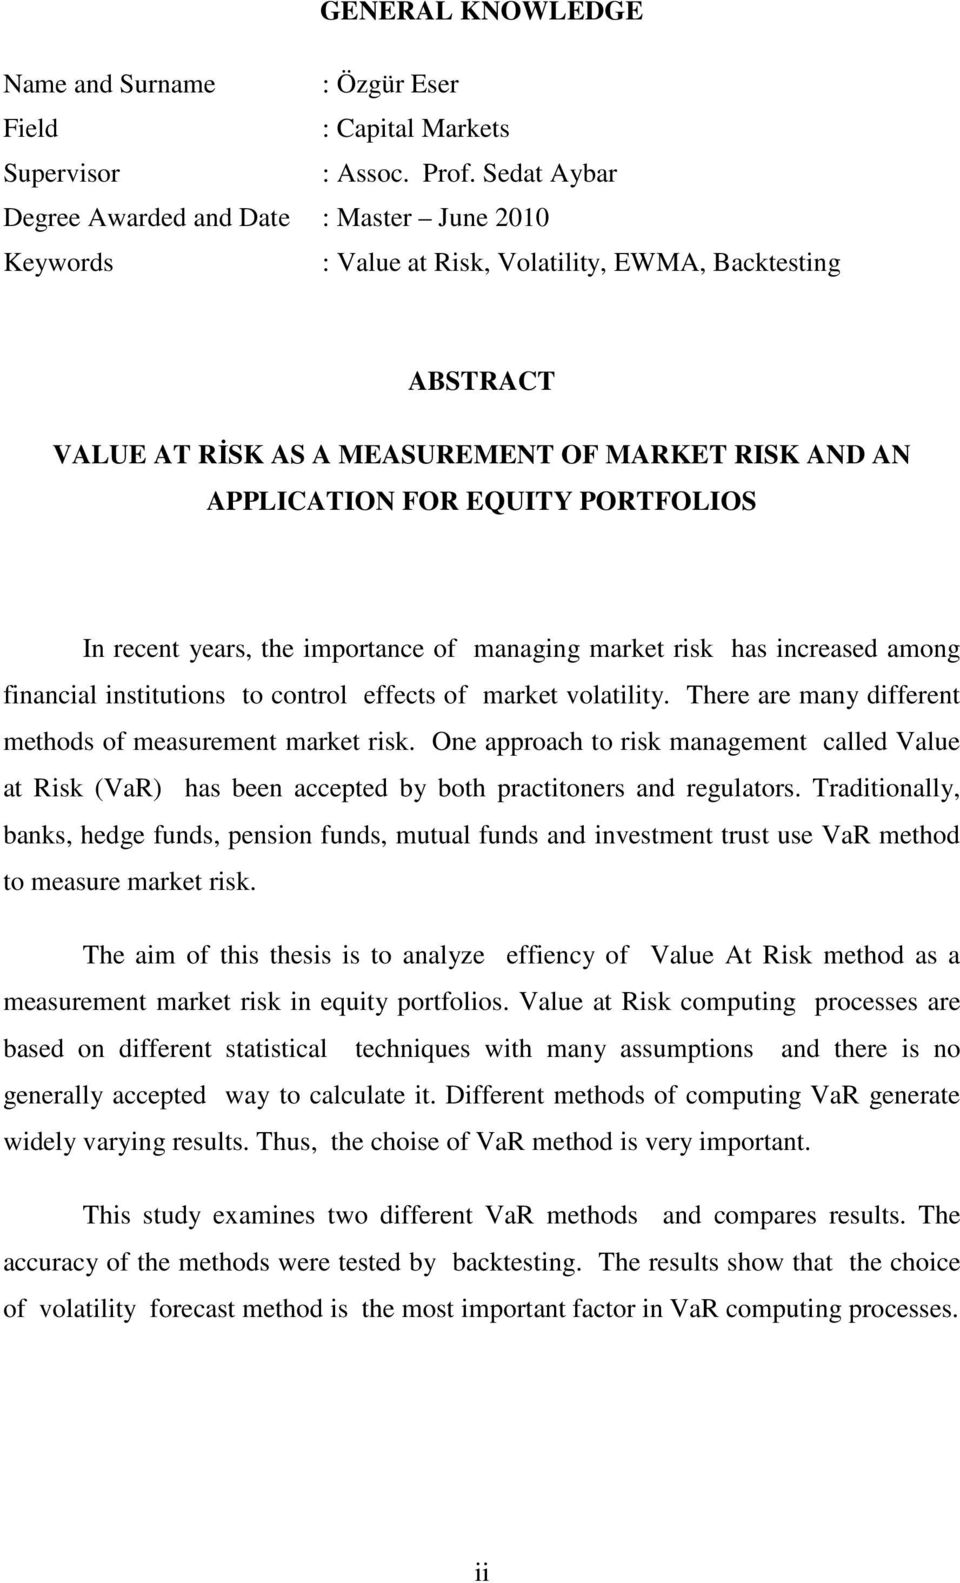 PORTFOLIOS In recent years, the importance of managing market risk has increased among financial institutions to control effects of market volatility.